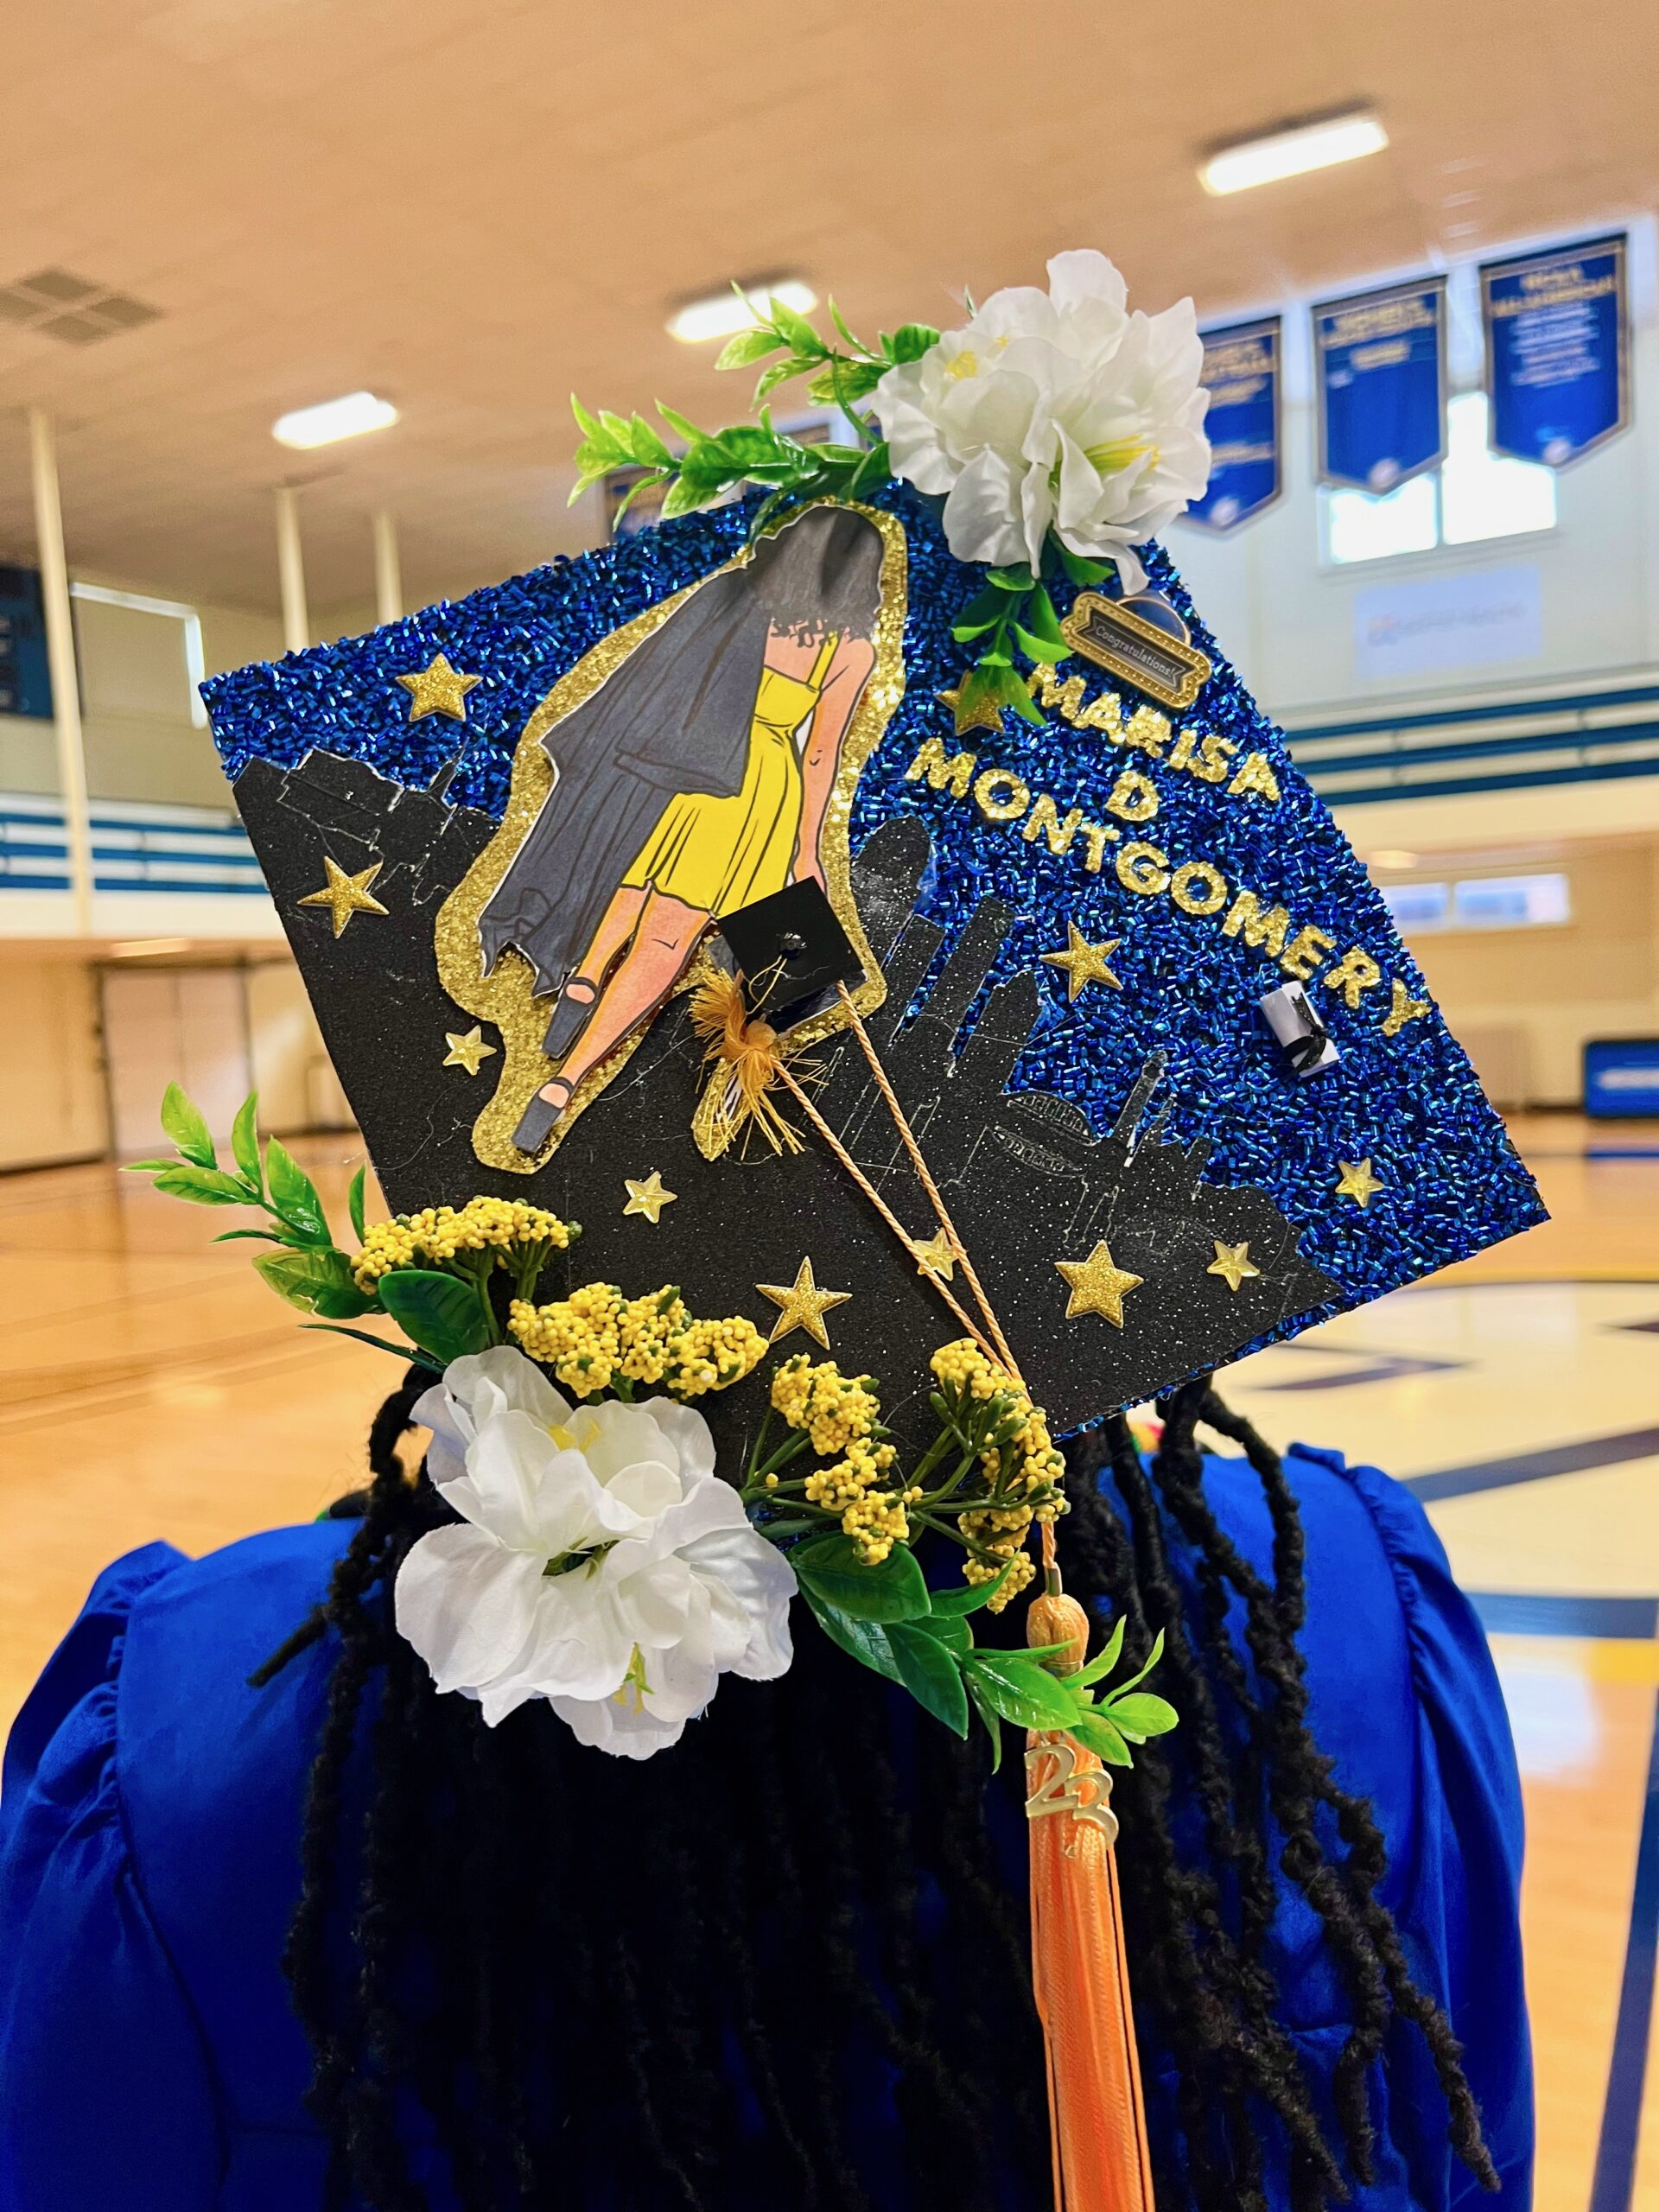 Decorated mortarboard reading "Marisa D Montgromery" wiith picture of the back of a woman in yellow dress walking towards the silhouette of the Louisville skyline while she holds a cap and gown.